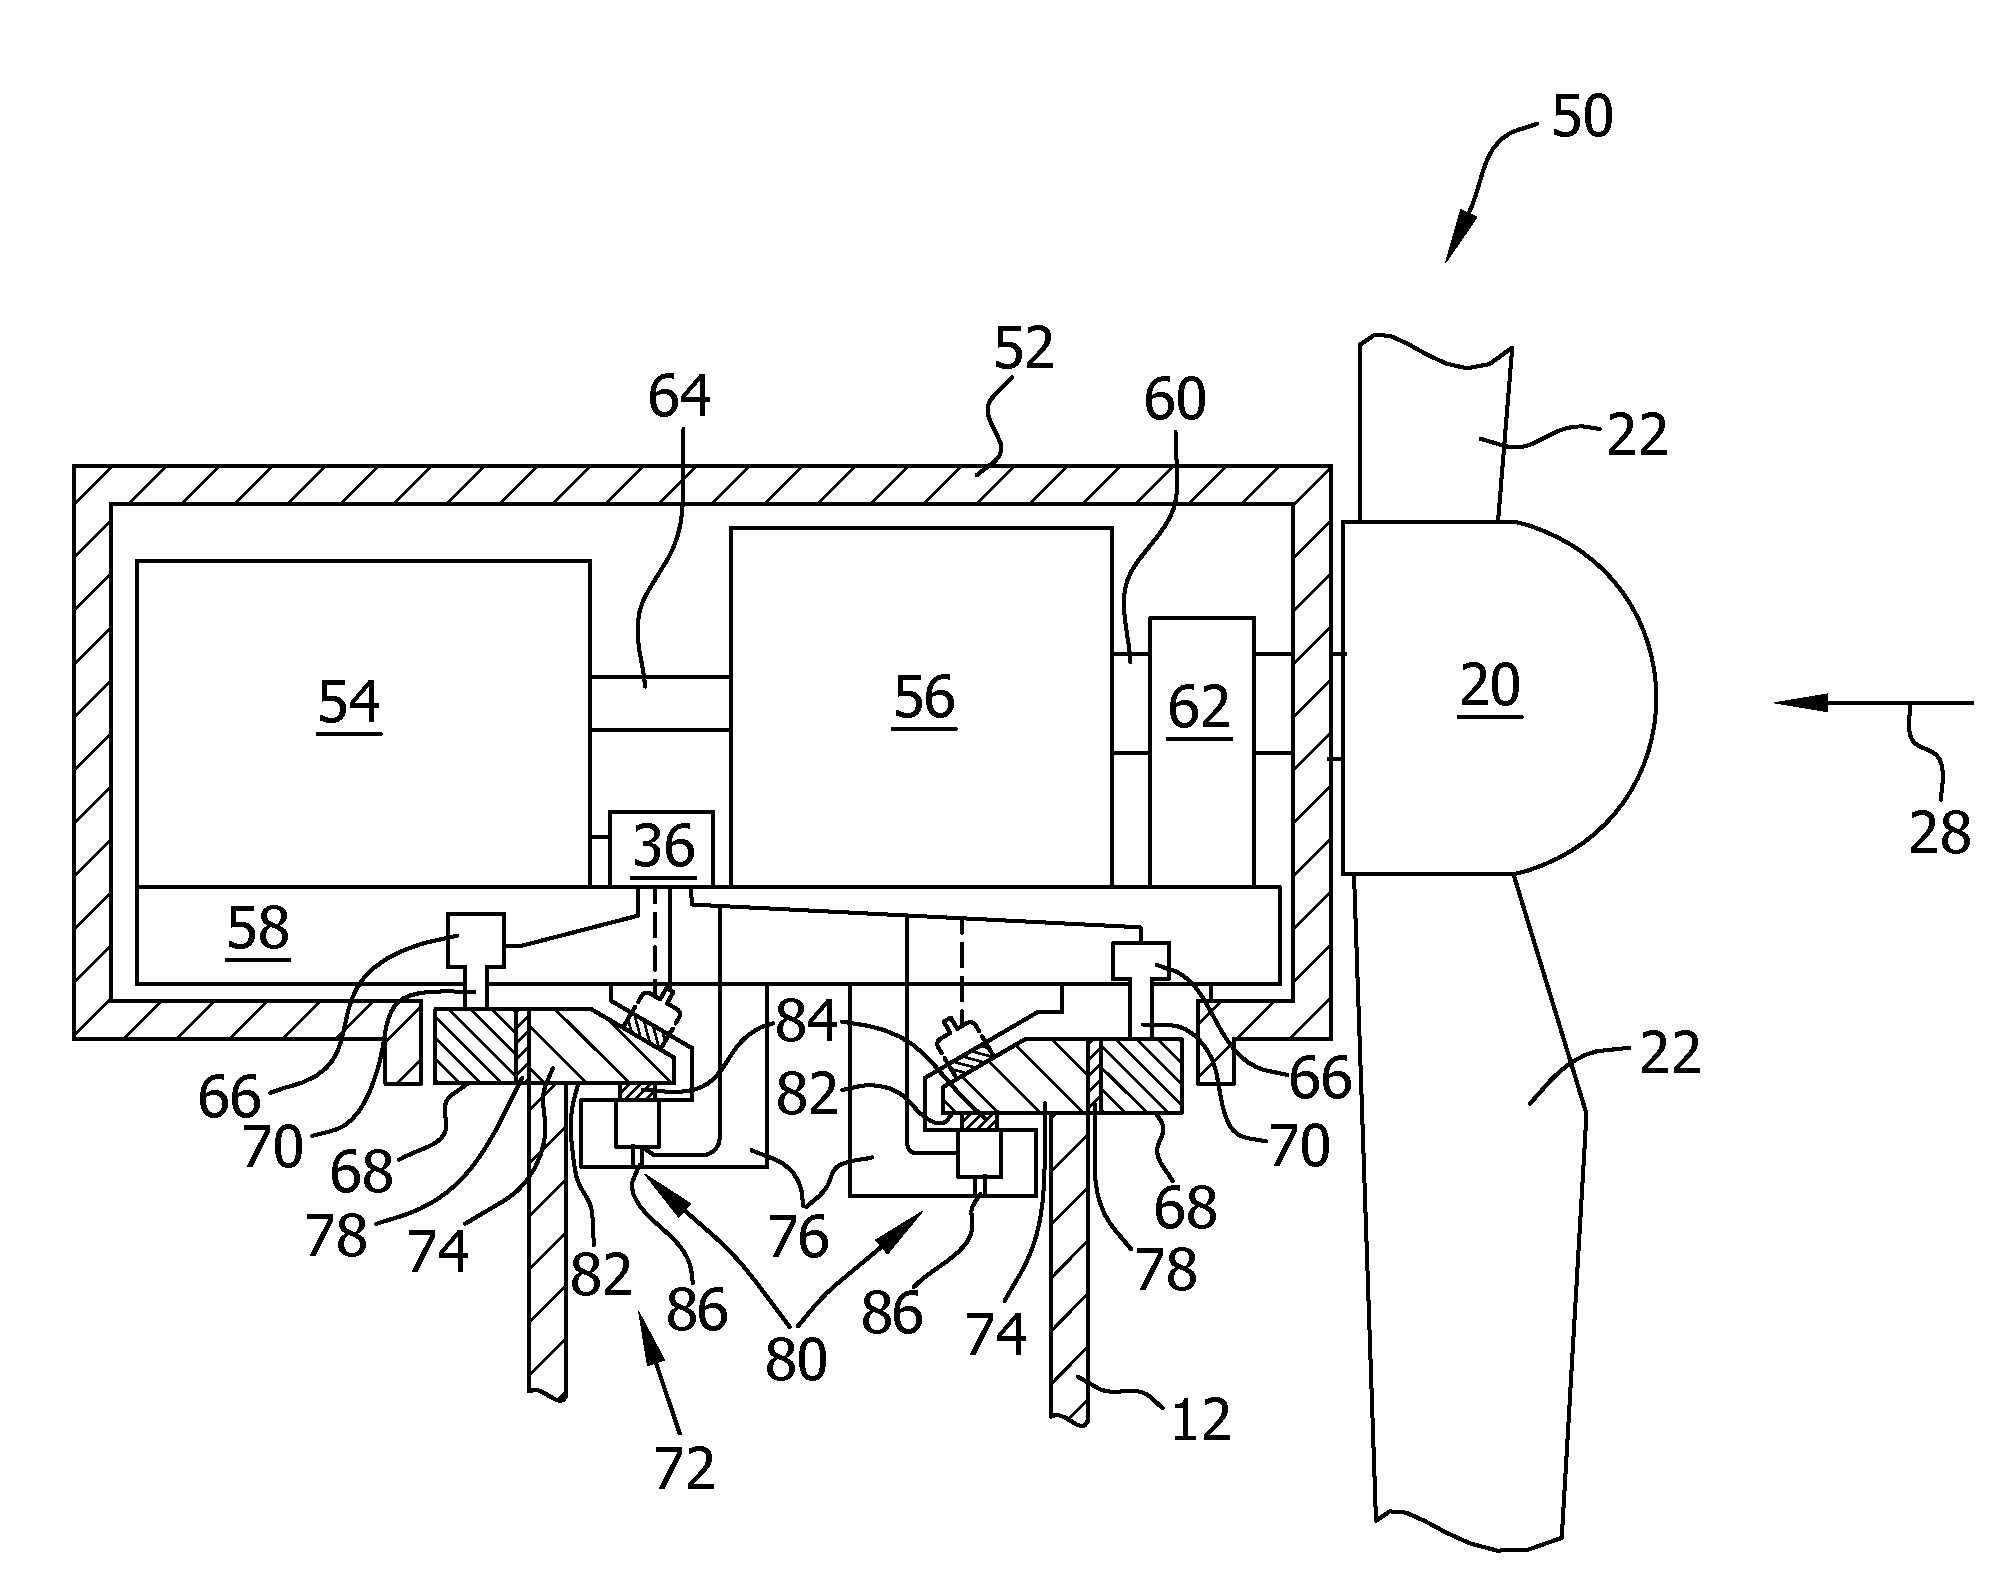 Yaw bearing assembly for use with a wind turbine and a method for braking using the same